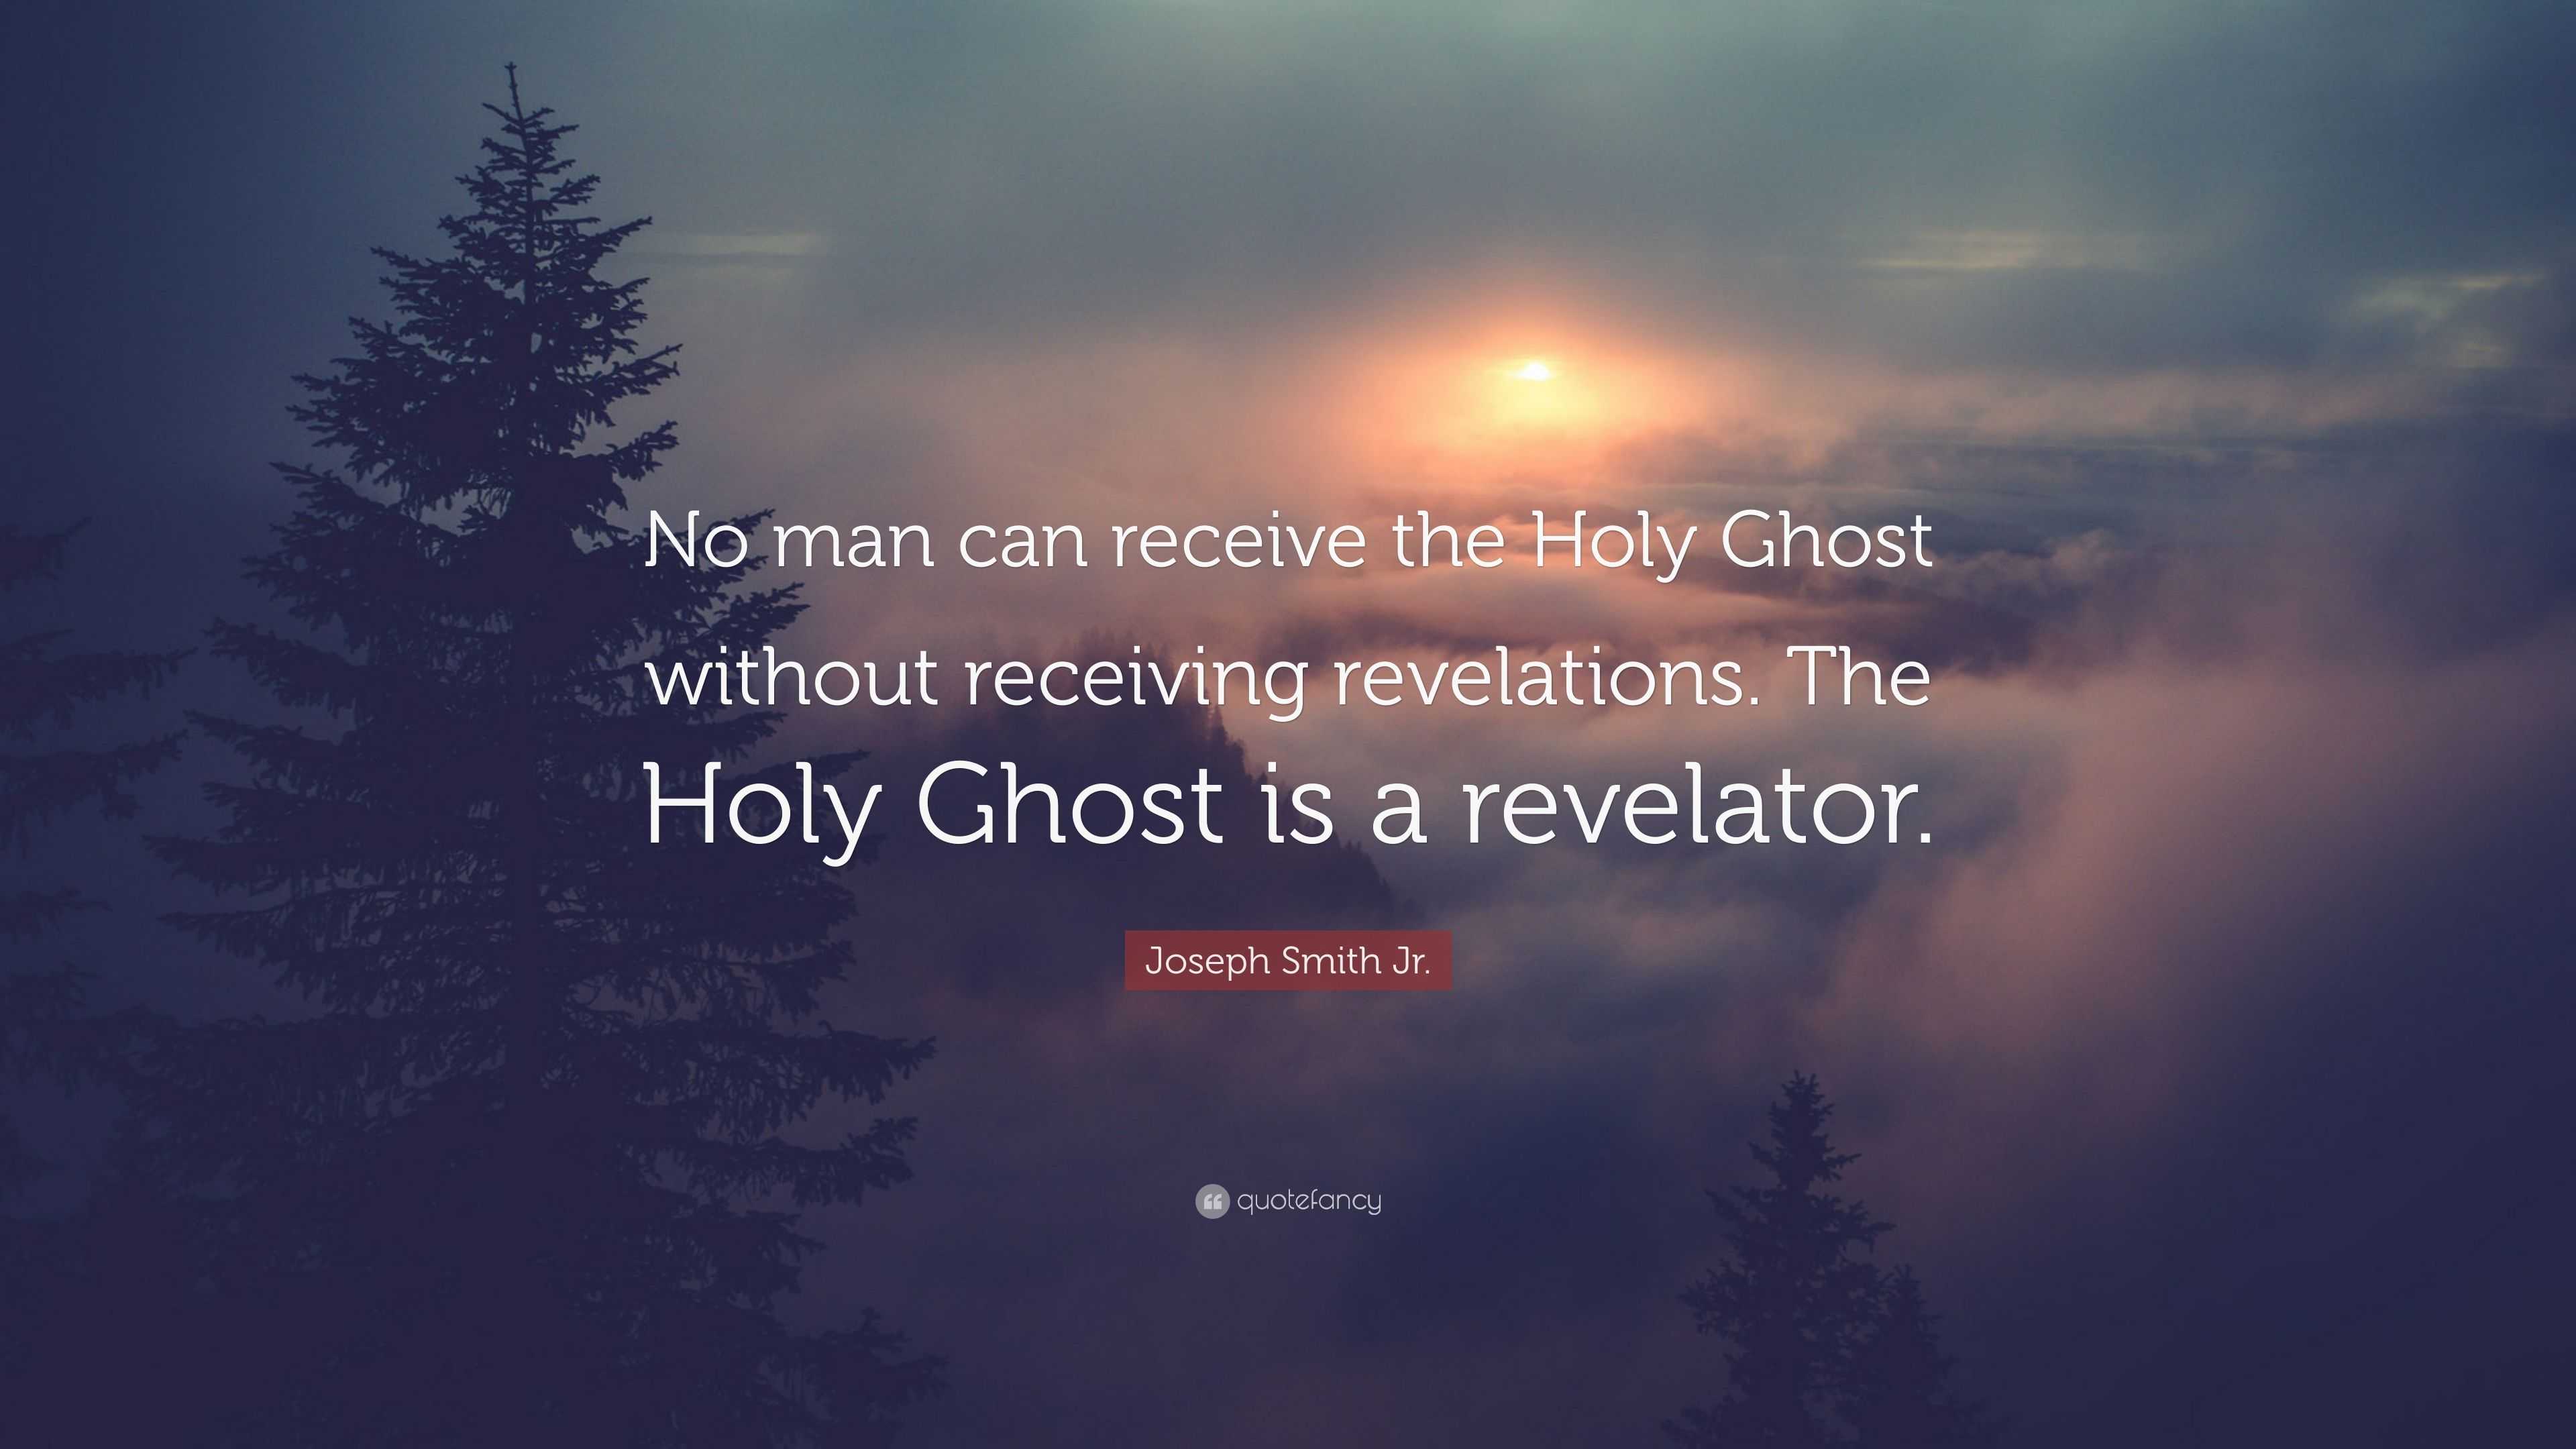 Have I denied the Holy Ghost?